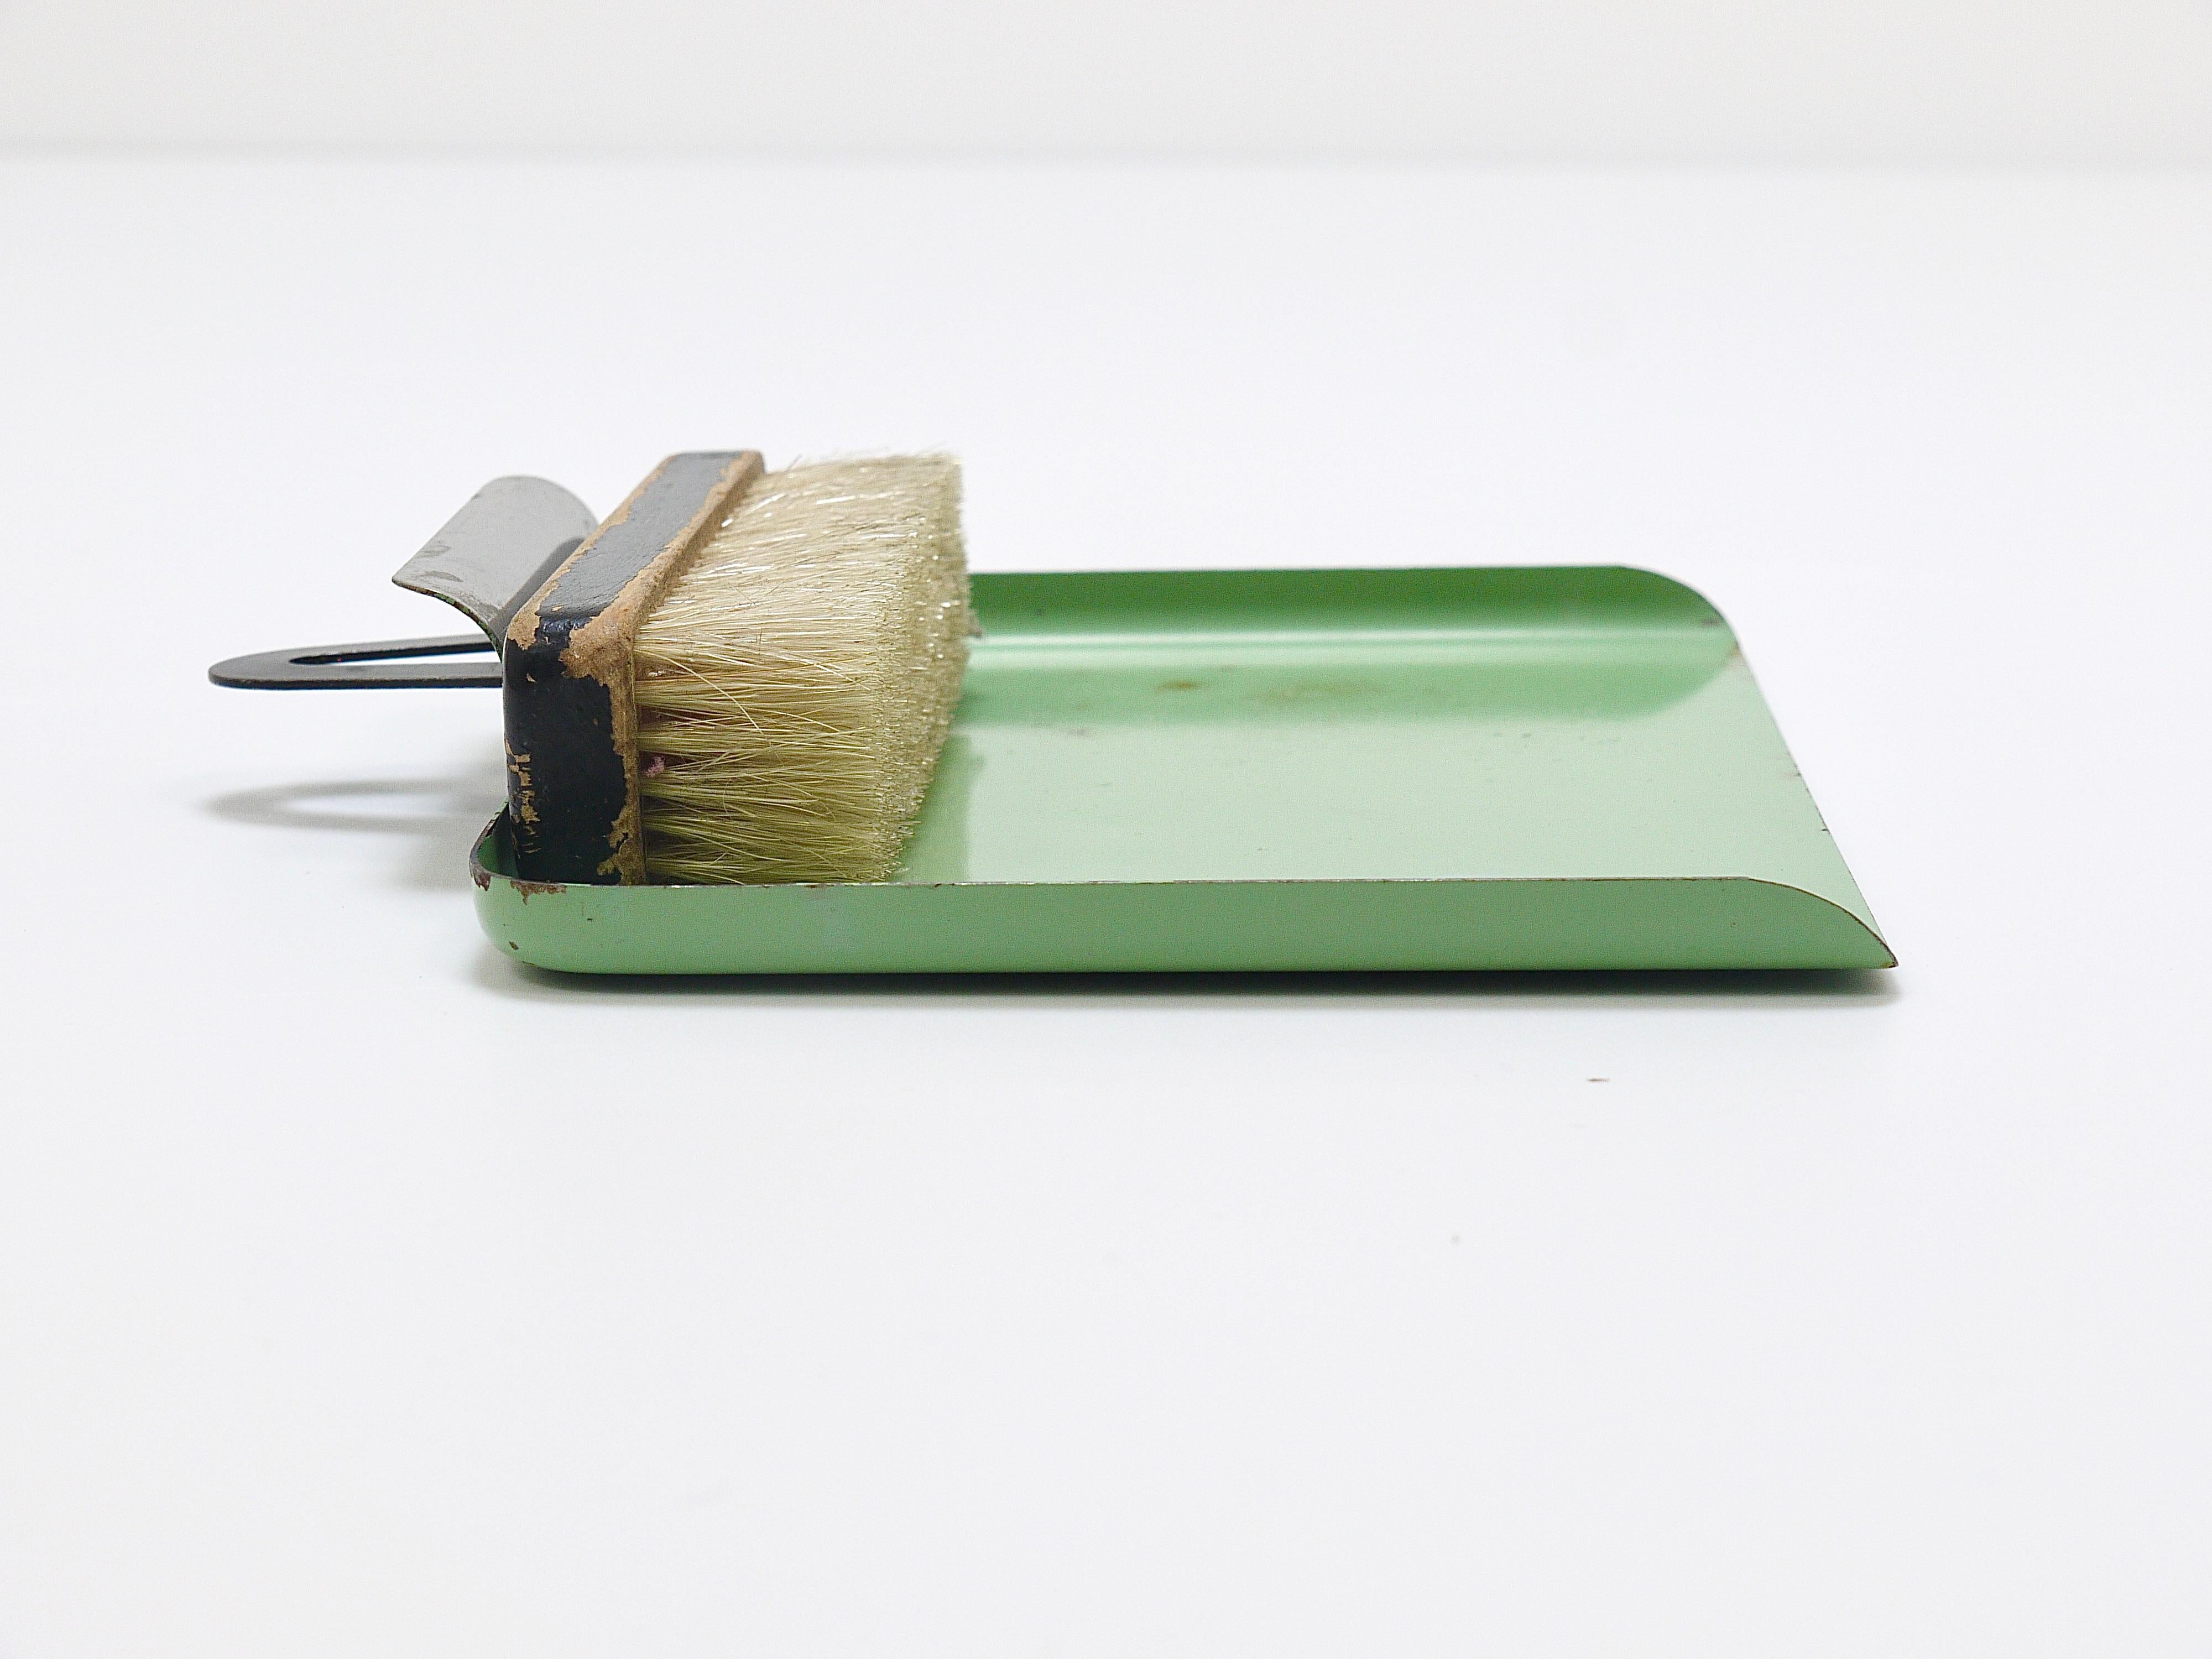 An iconic Bauhaus table brush and pan sweeping set from the early 1930s in light-green / pastel jade green. Designed by Marianne Brandt (1893-1983), manufactured by Ruppel Werke, Ruppelwerke in Gotha, Germany. Made of sheet metal and wood. In good